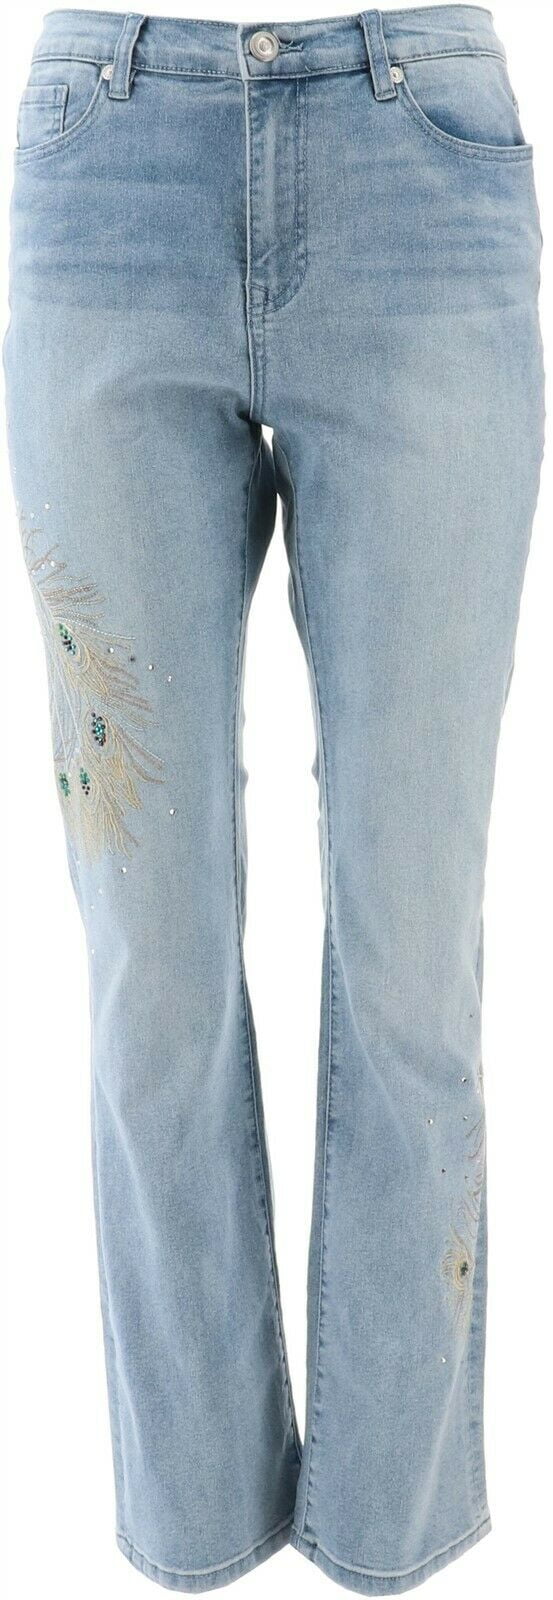 diane gilman clearance jeans